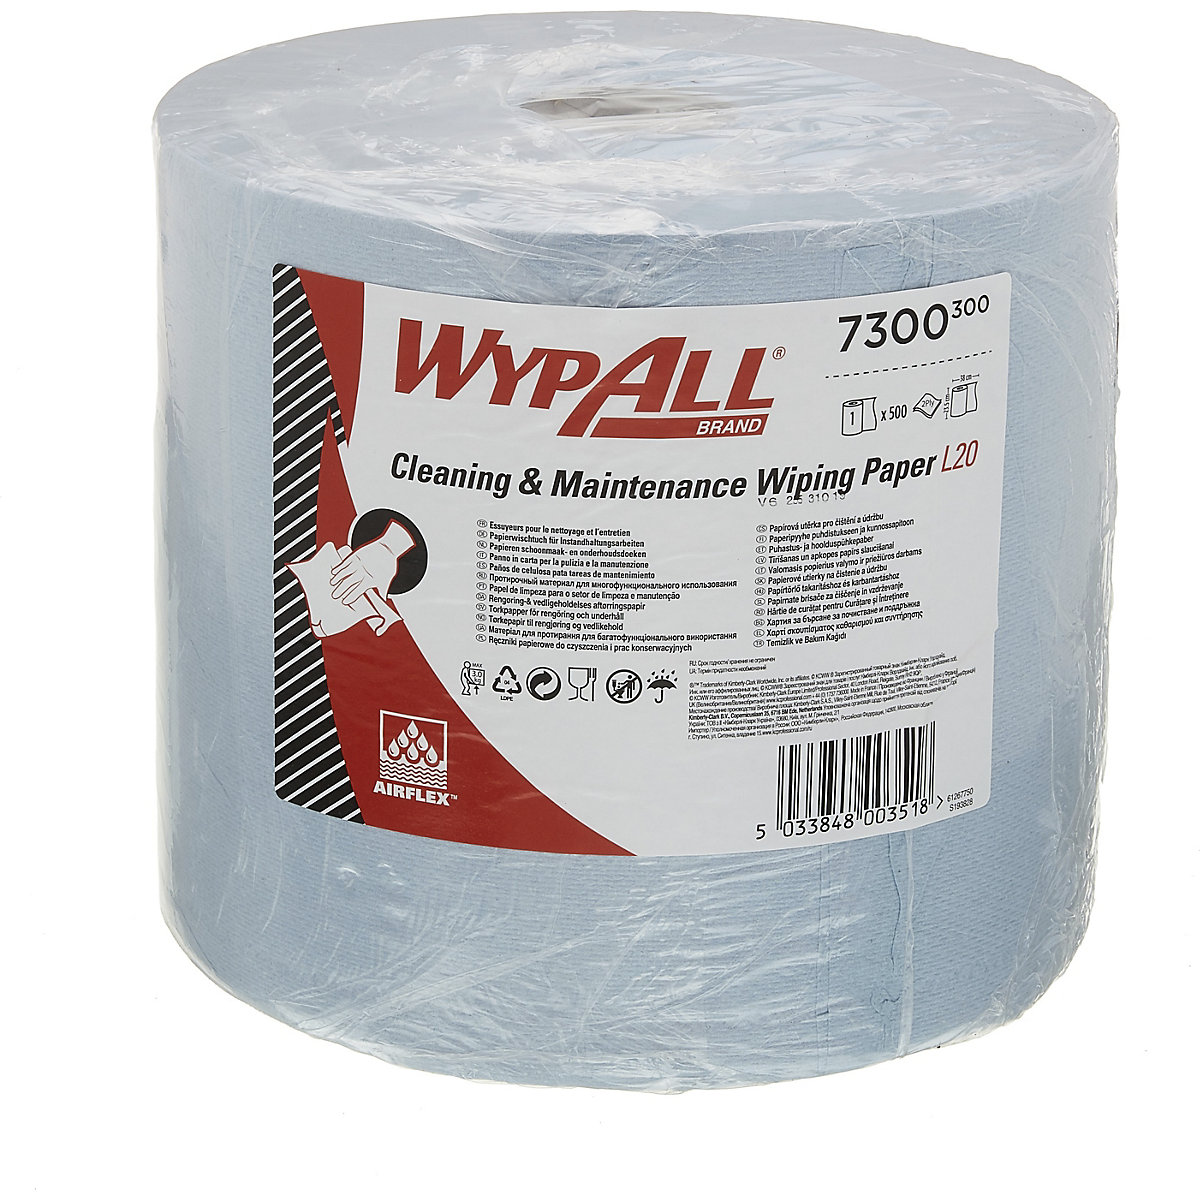 WypAll® wipes, large roll 7300 - Kimberly-Clark